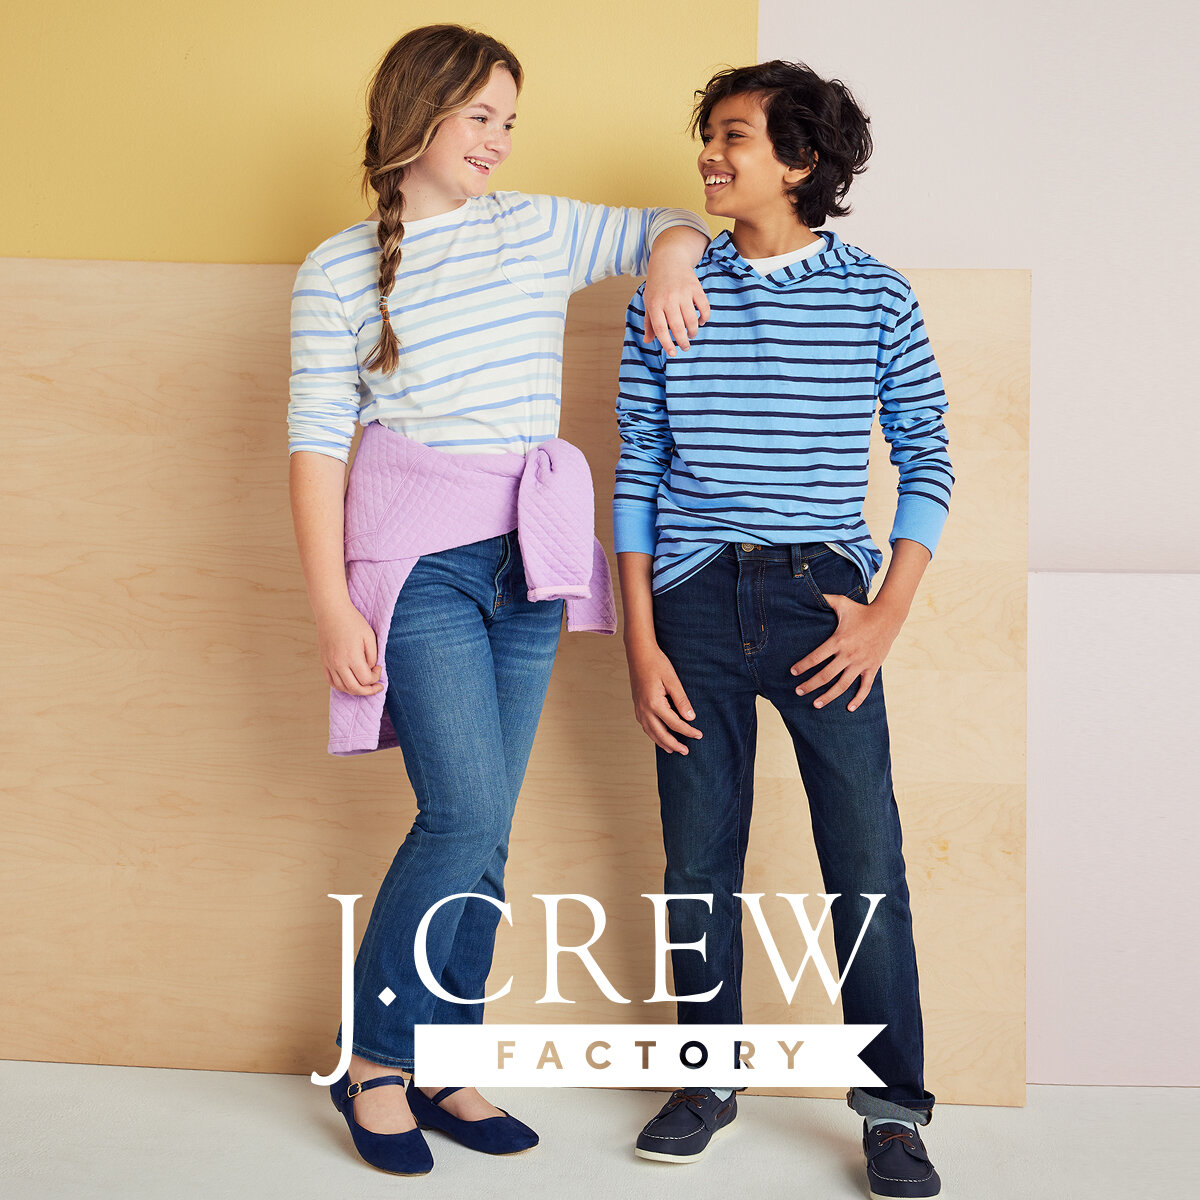 Style for everyone, savings for all! 🛍️✨ Dive into deals at J.Crew Factory and discover trendy looks for the whole family. Check out current promotions below: 👇

✨40-60% off storewide and extra 60% off clearance styles! Some exclusions apply. See s